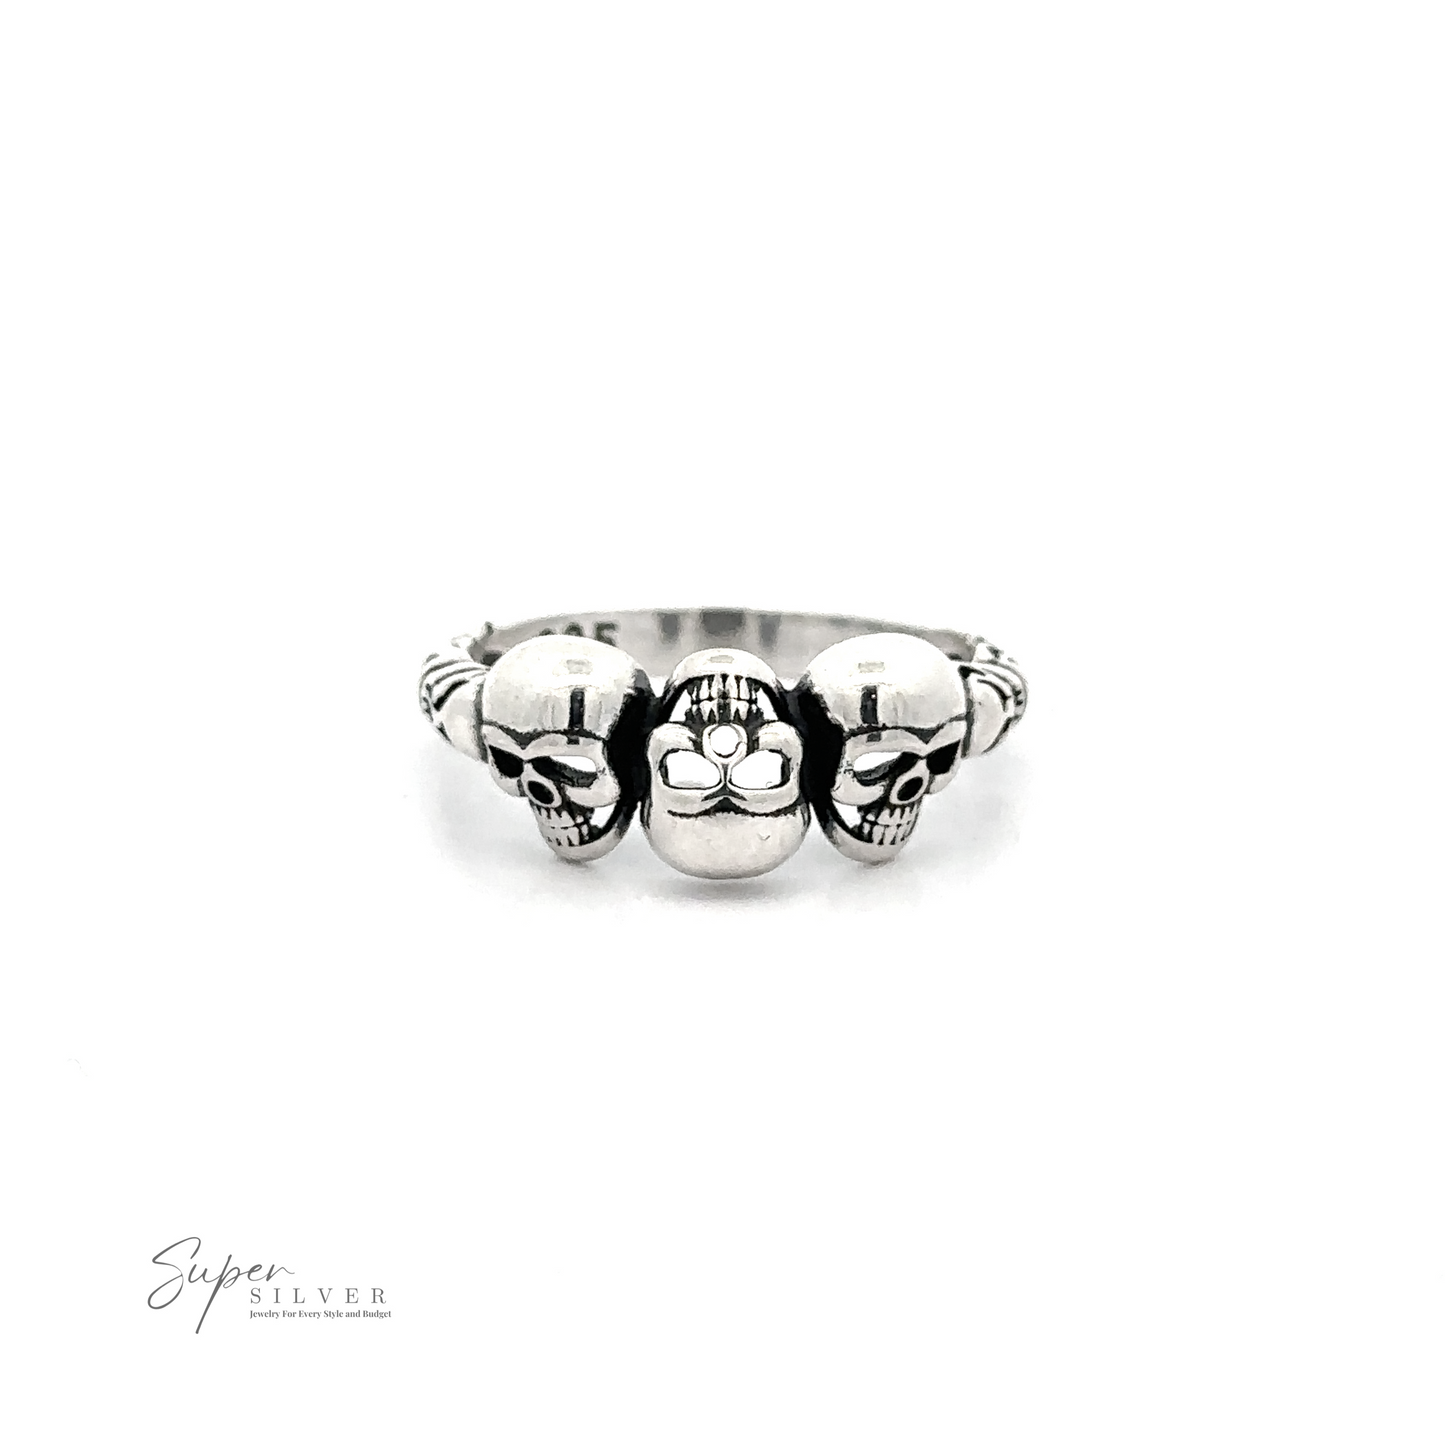 
                  
                    Three Skulls Ring featuring three skulls, with the central skull slightly larger and adorned with a daisy in its mouth, against a white background.
                  
                